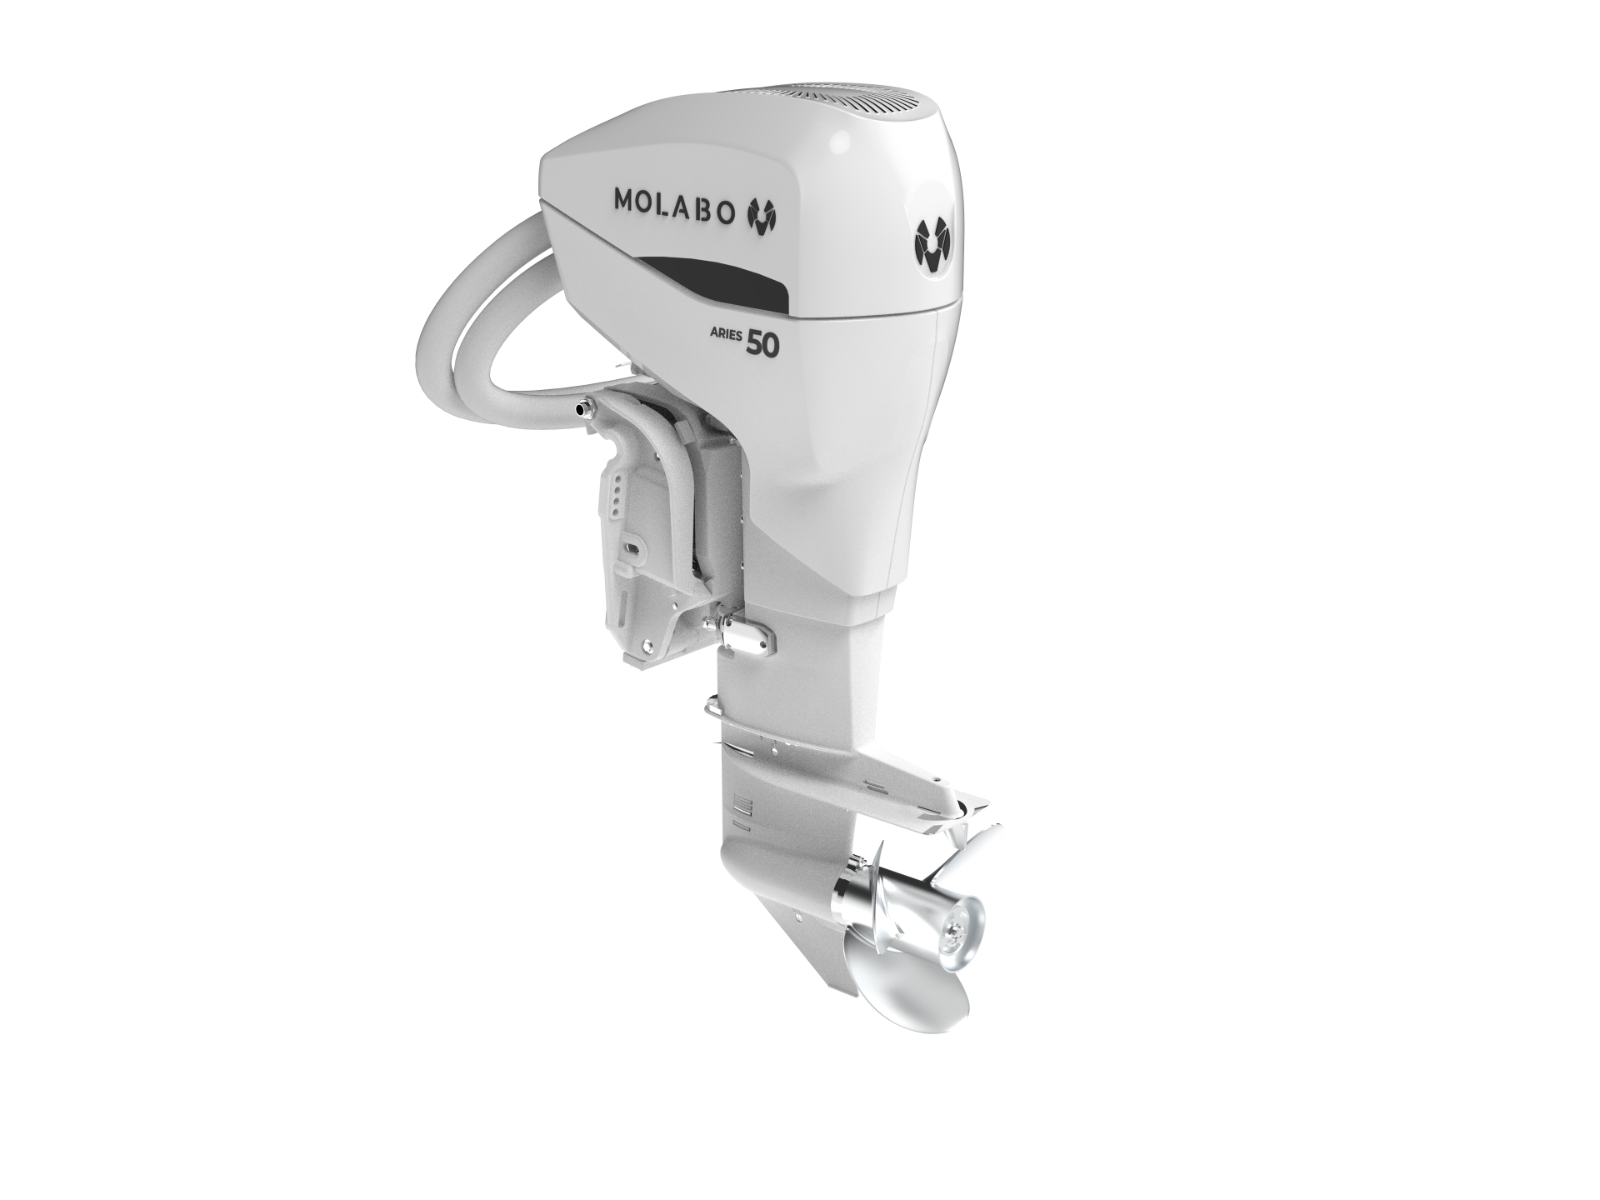 Engine outboard electric ARIES R50 IP65 50kW 48V - Shaft - XL - White